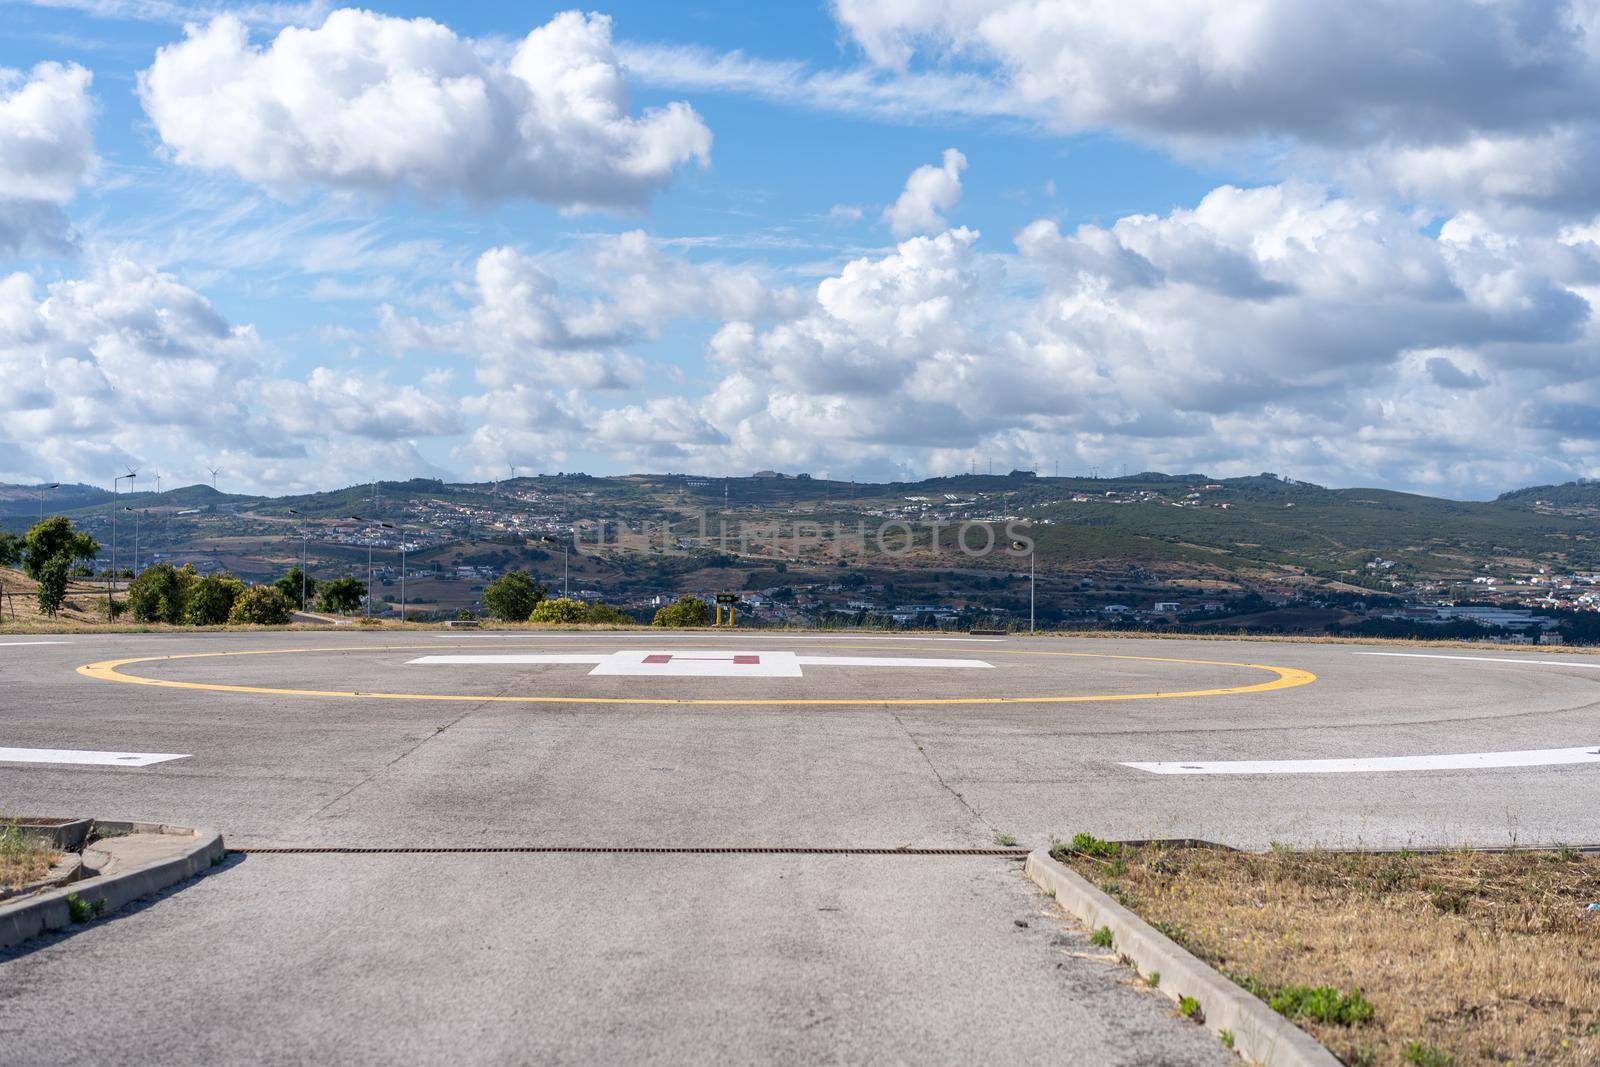 Helipad. Helicopter Landing Pad near emergency hospital in Portugal with cloud sky and city on background by andreonegin